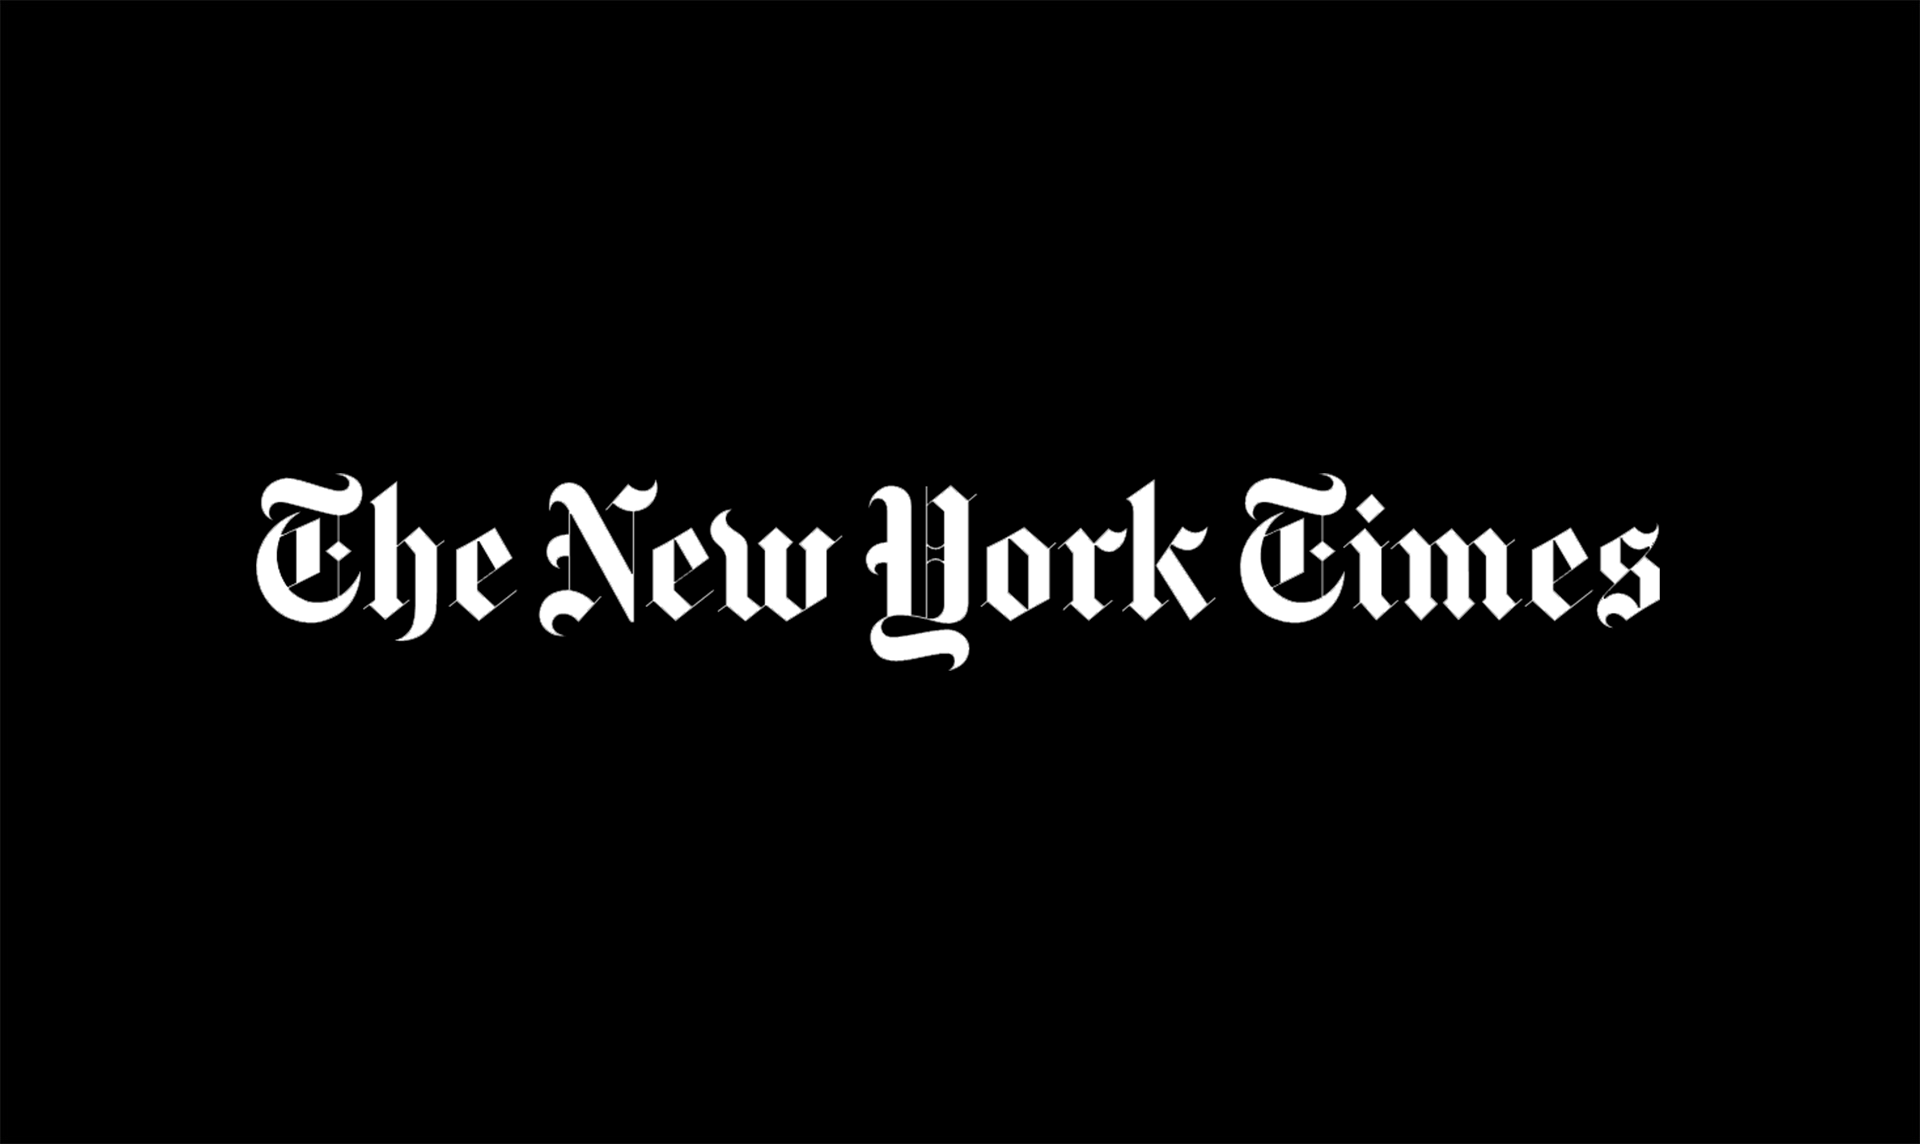 The logo of the new york times displayed in white gothic script on a black background.